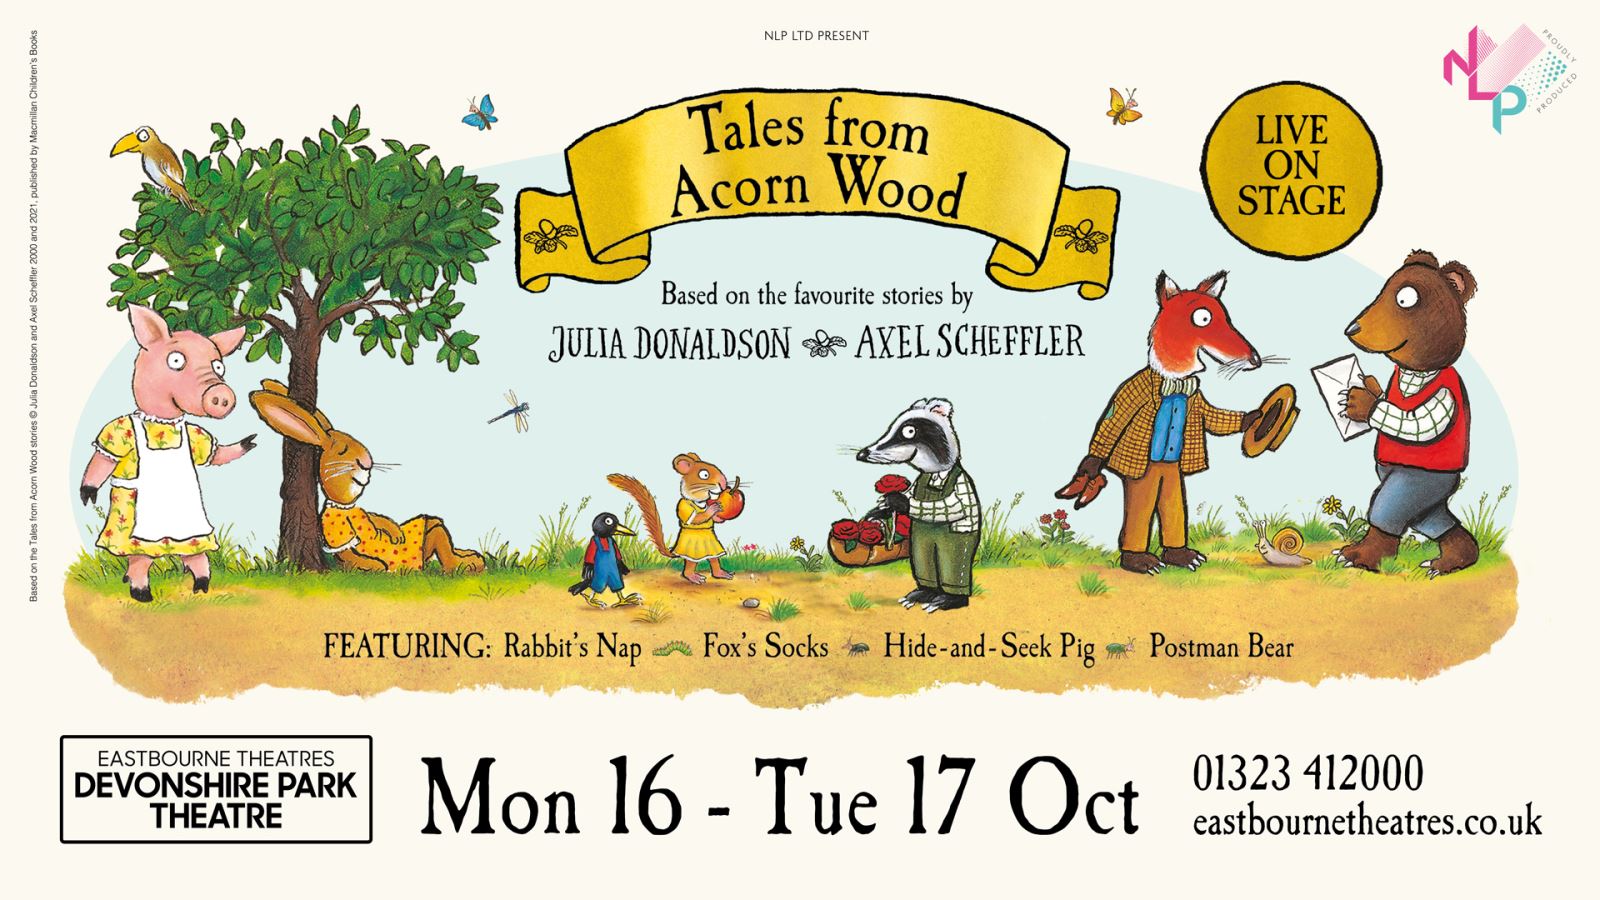 Win tickets to Tales from Acorn Wood